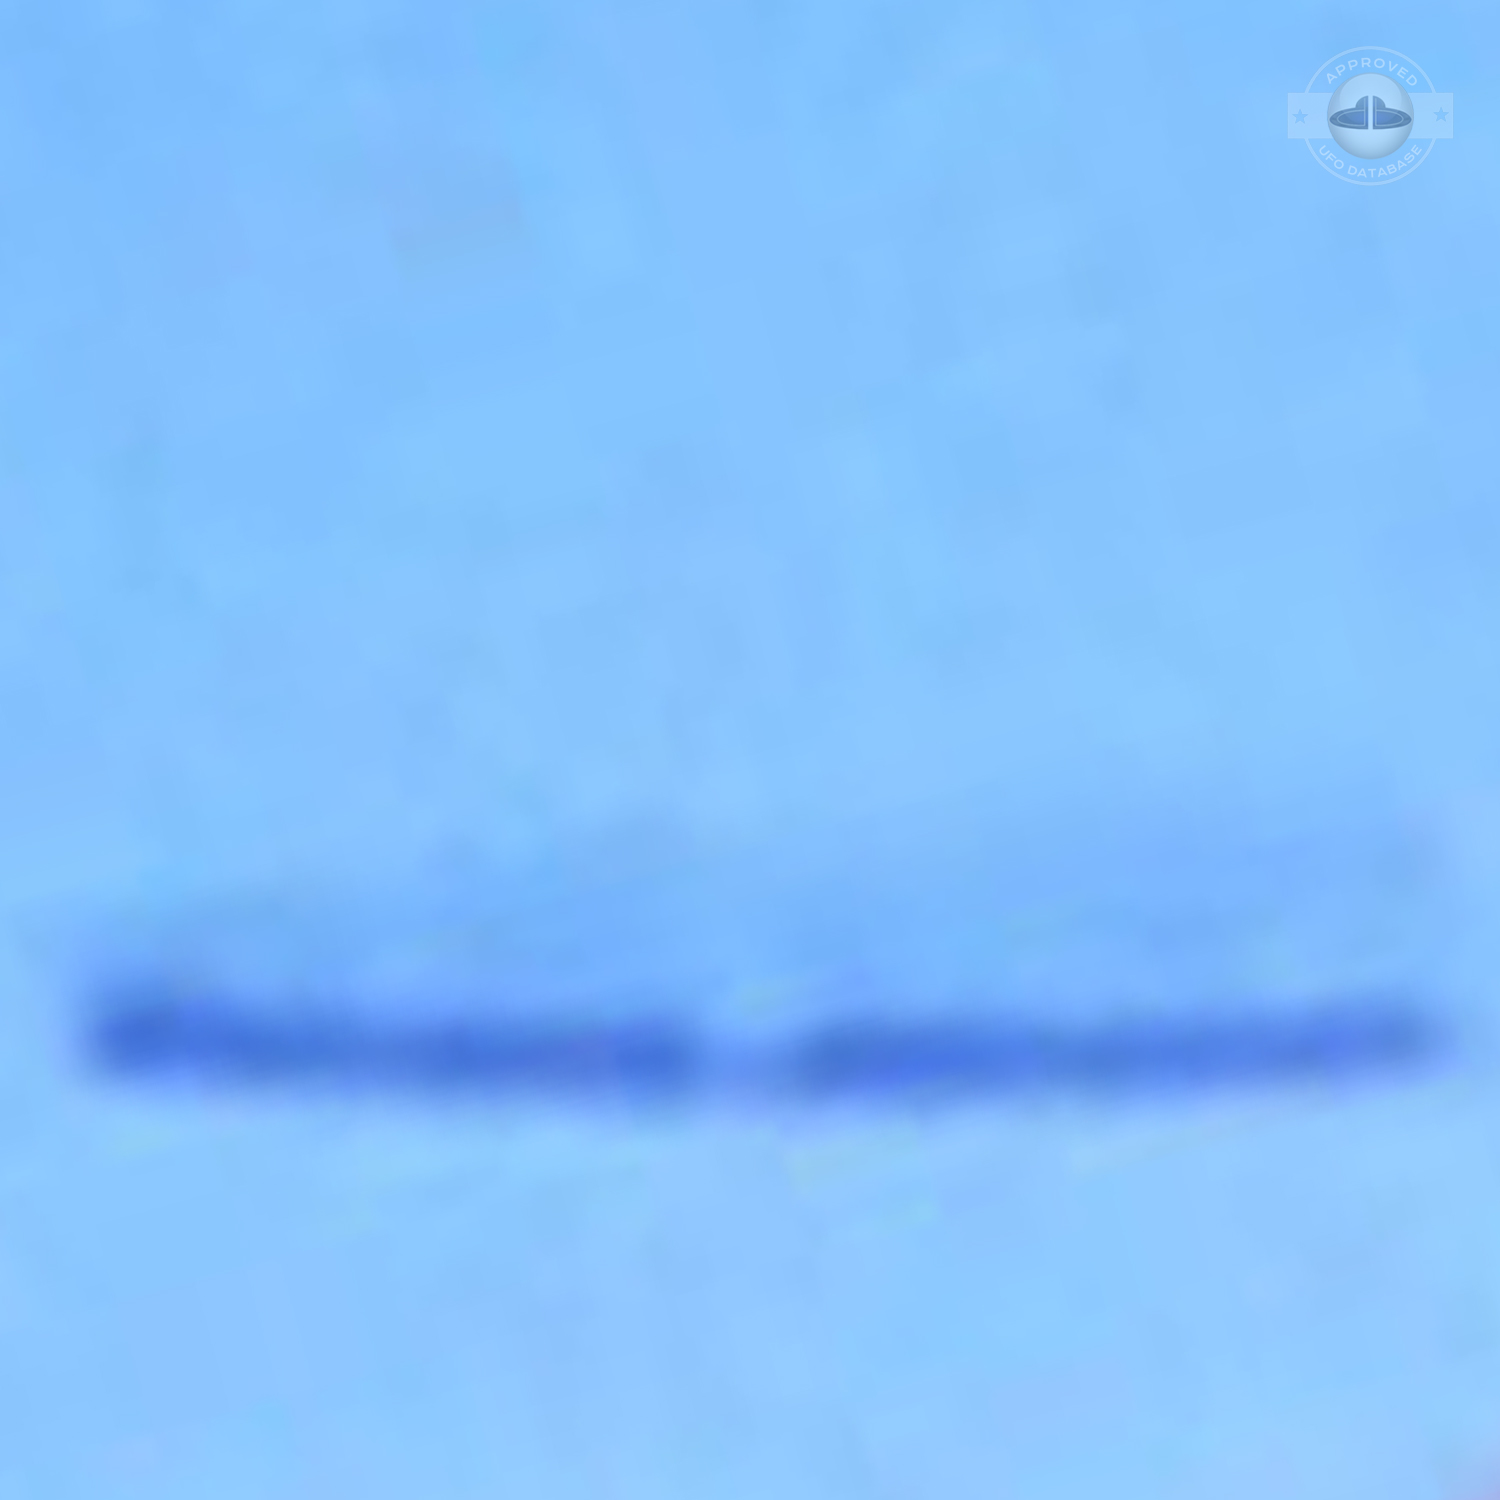 Little Rock, Arkansas UFO Pictures | UFO over hangar during Air Show UFO Picture #3-6